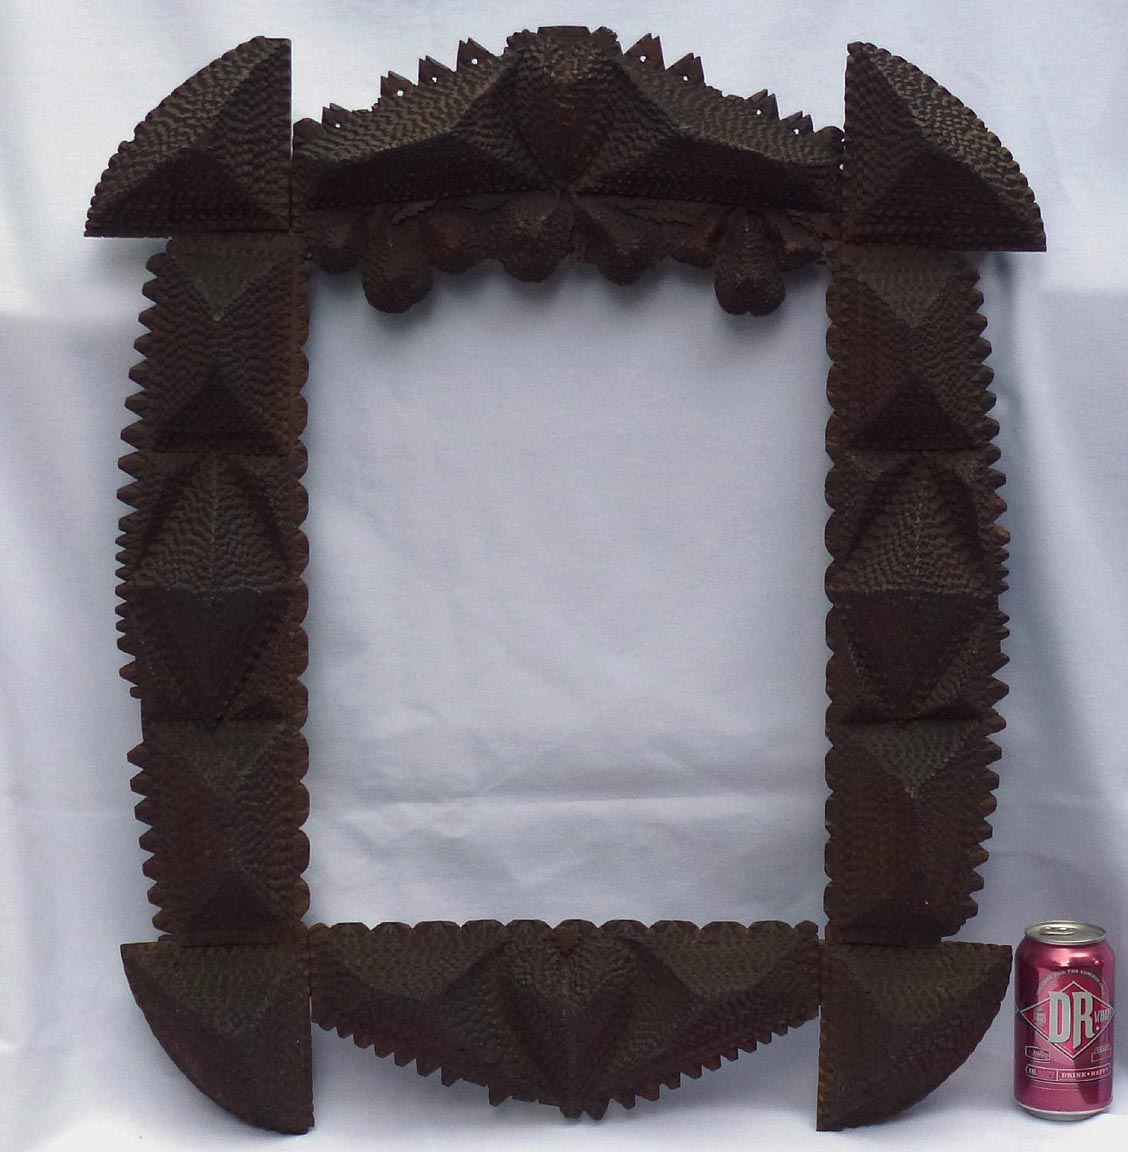 Large tramp art frame with hearts, carved fruit